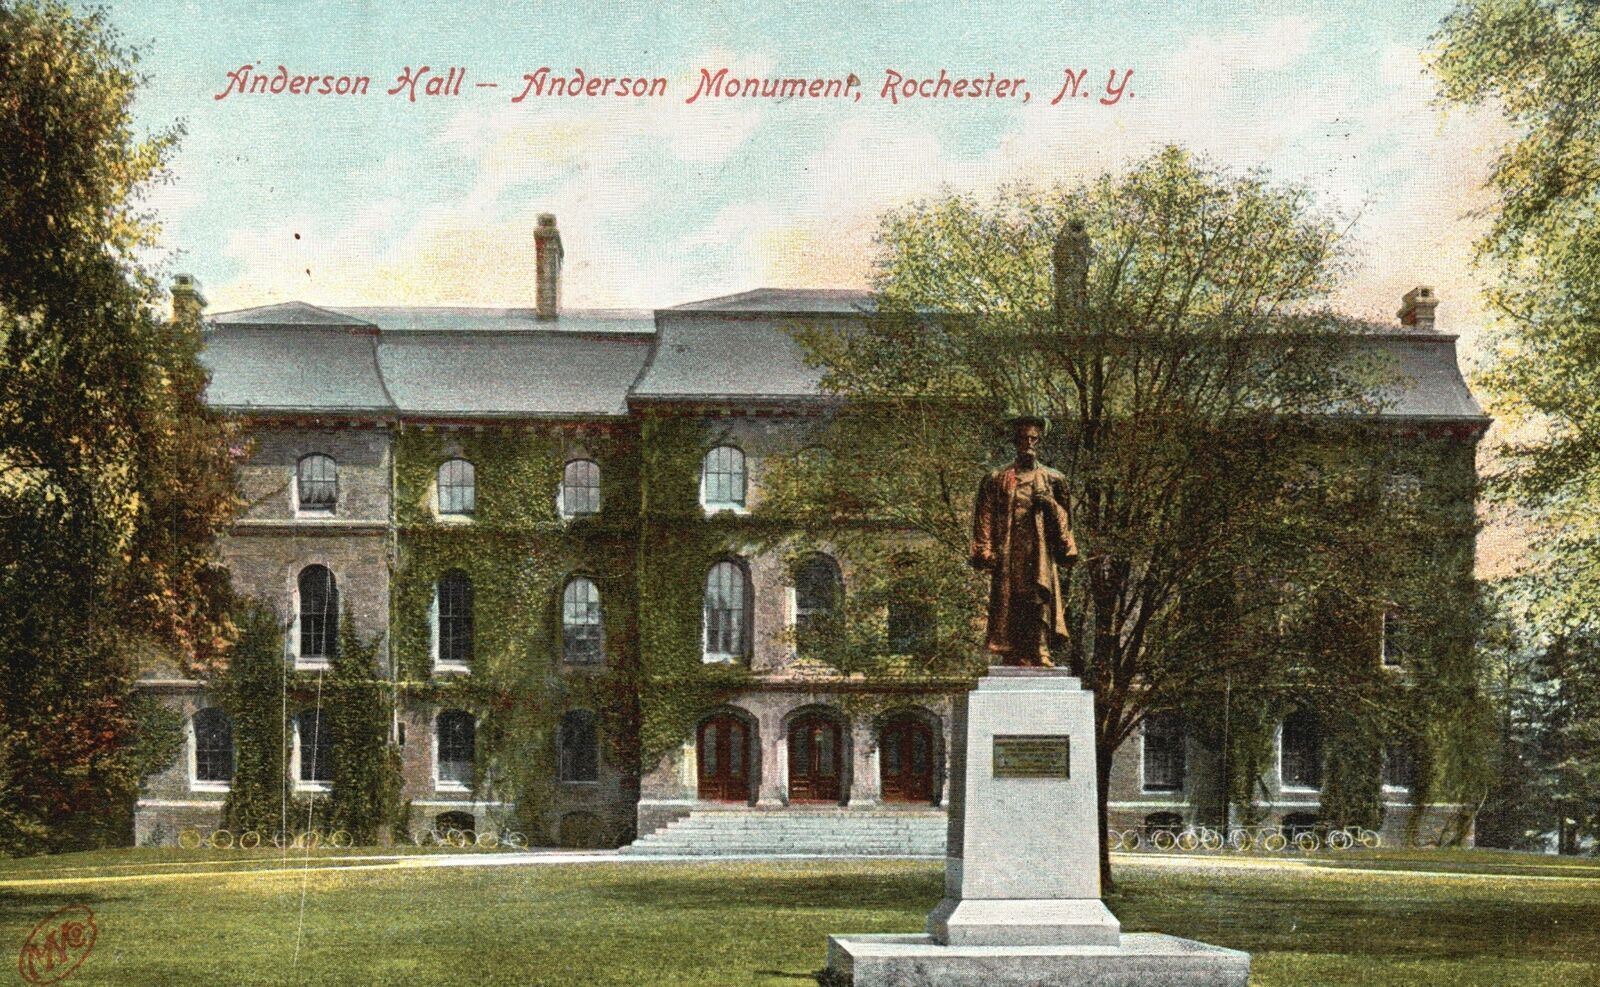 Vintage Postcard 1909 Anderson Hall Building Monument Rochester New York N.Y.